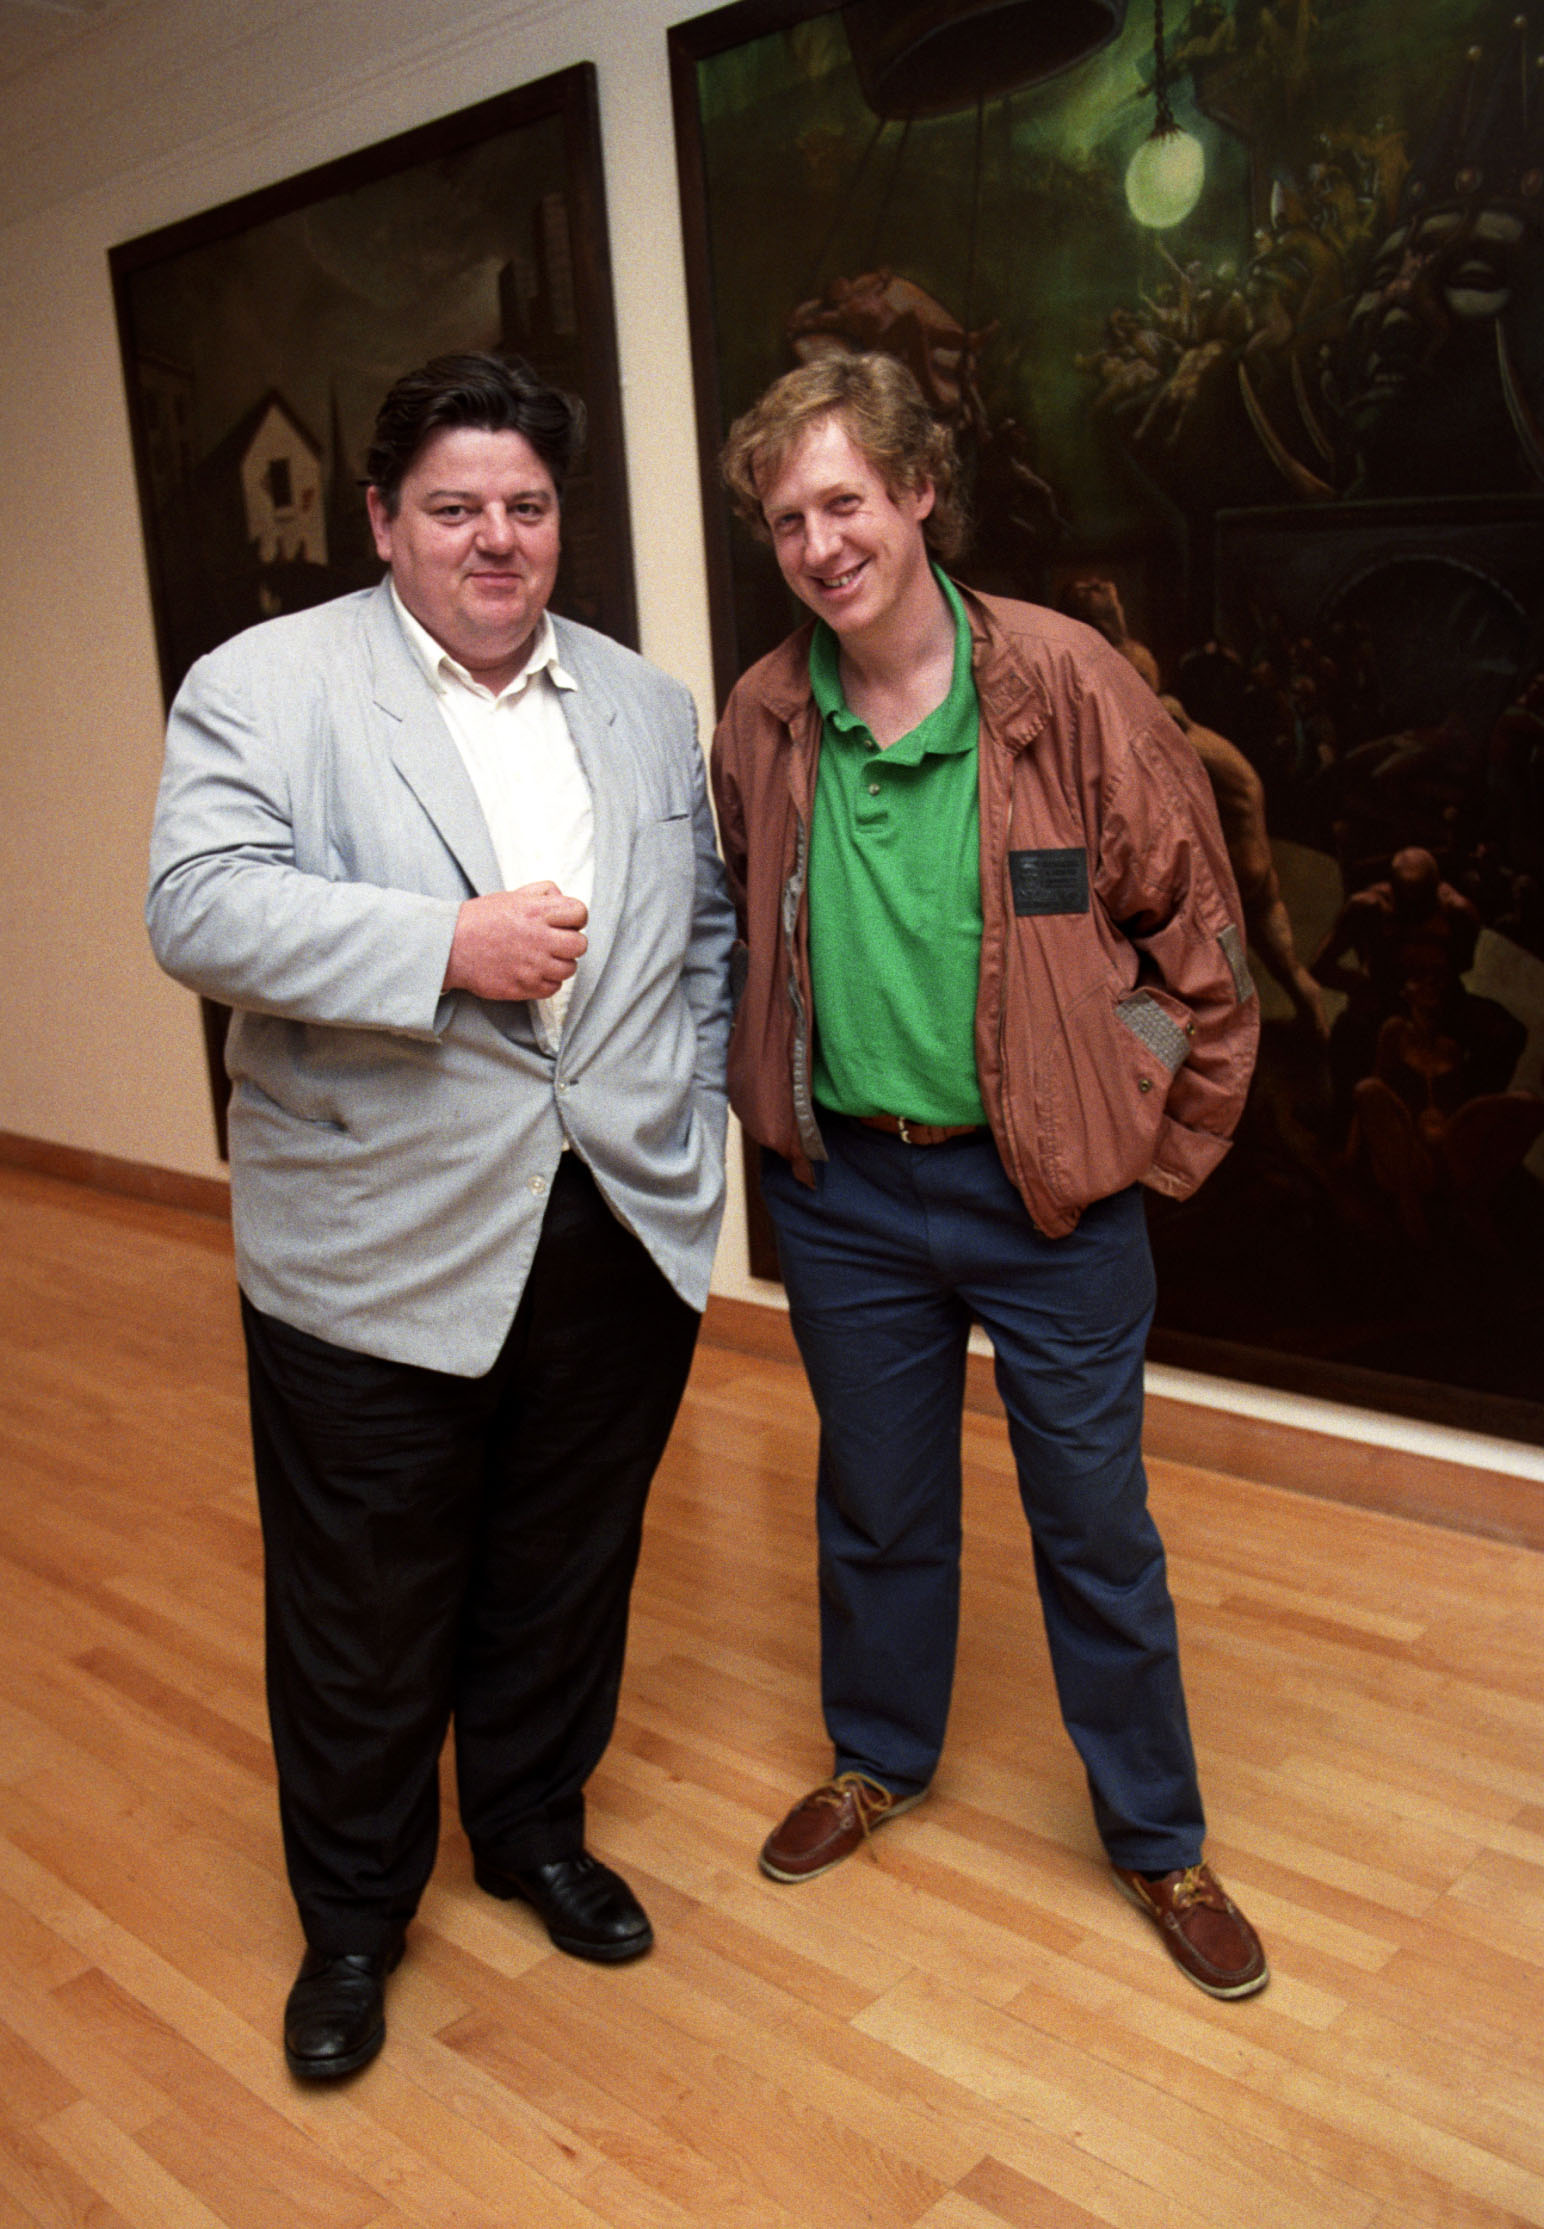 Robbie Coltrane pictured with Glasgow artist Peter Howsen in 1990.